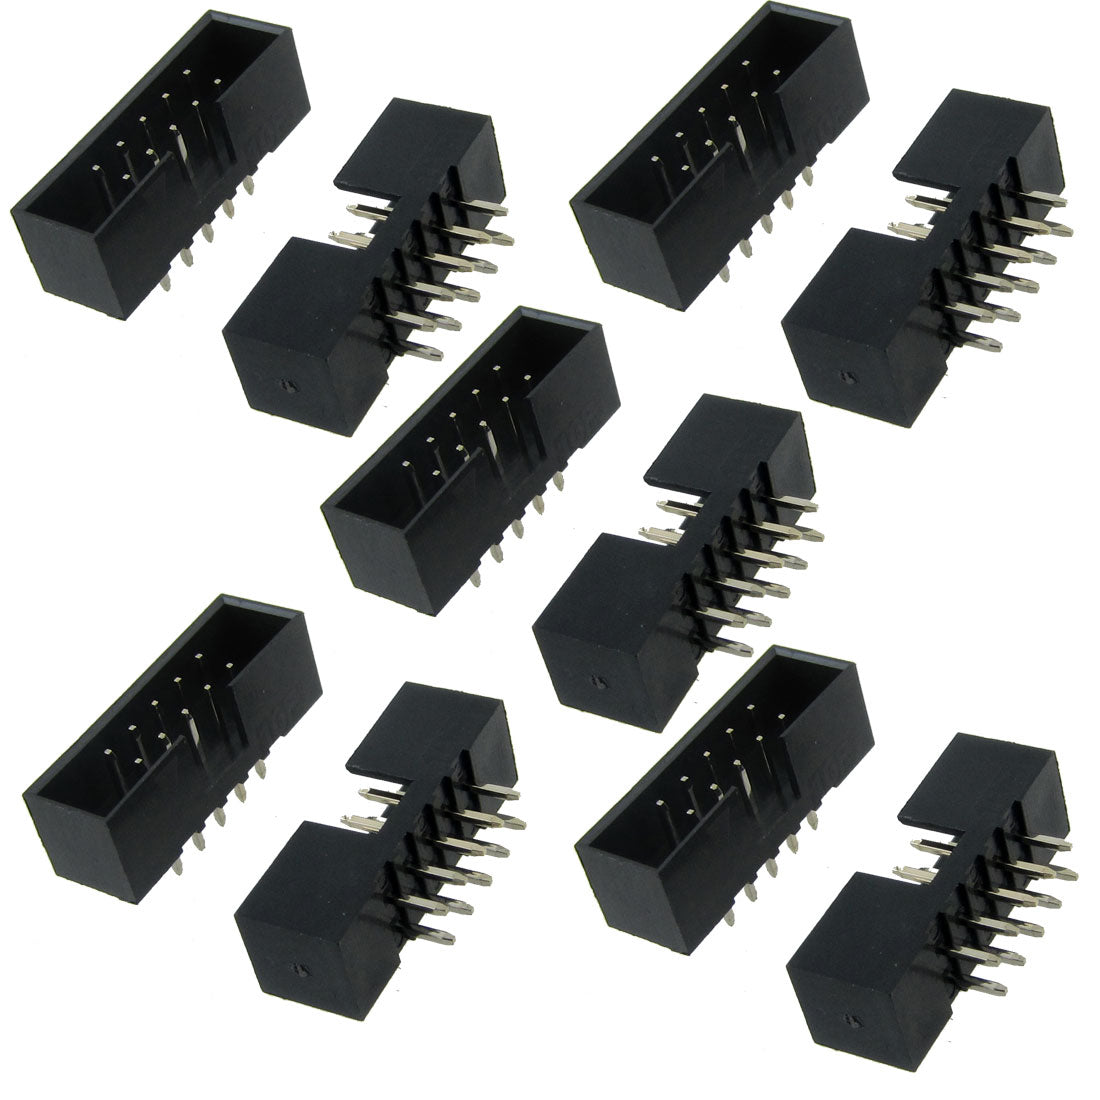 uxcell Uxcell 10 Pcs 2x5 Pin 2mm Pitch Double Row PCB IDC Pin Headers